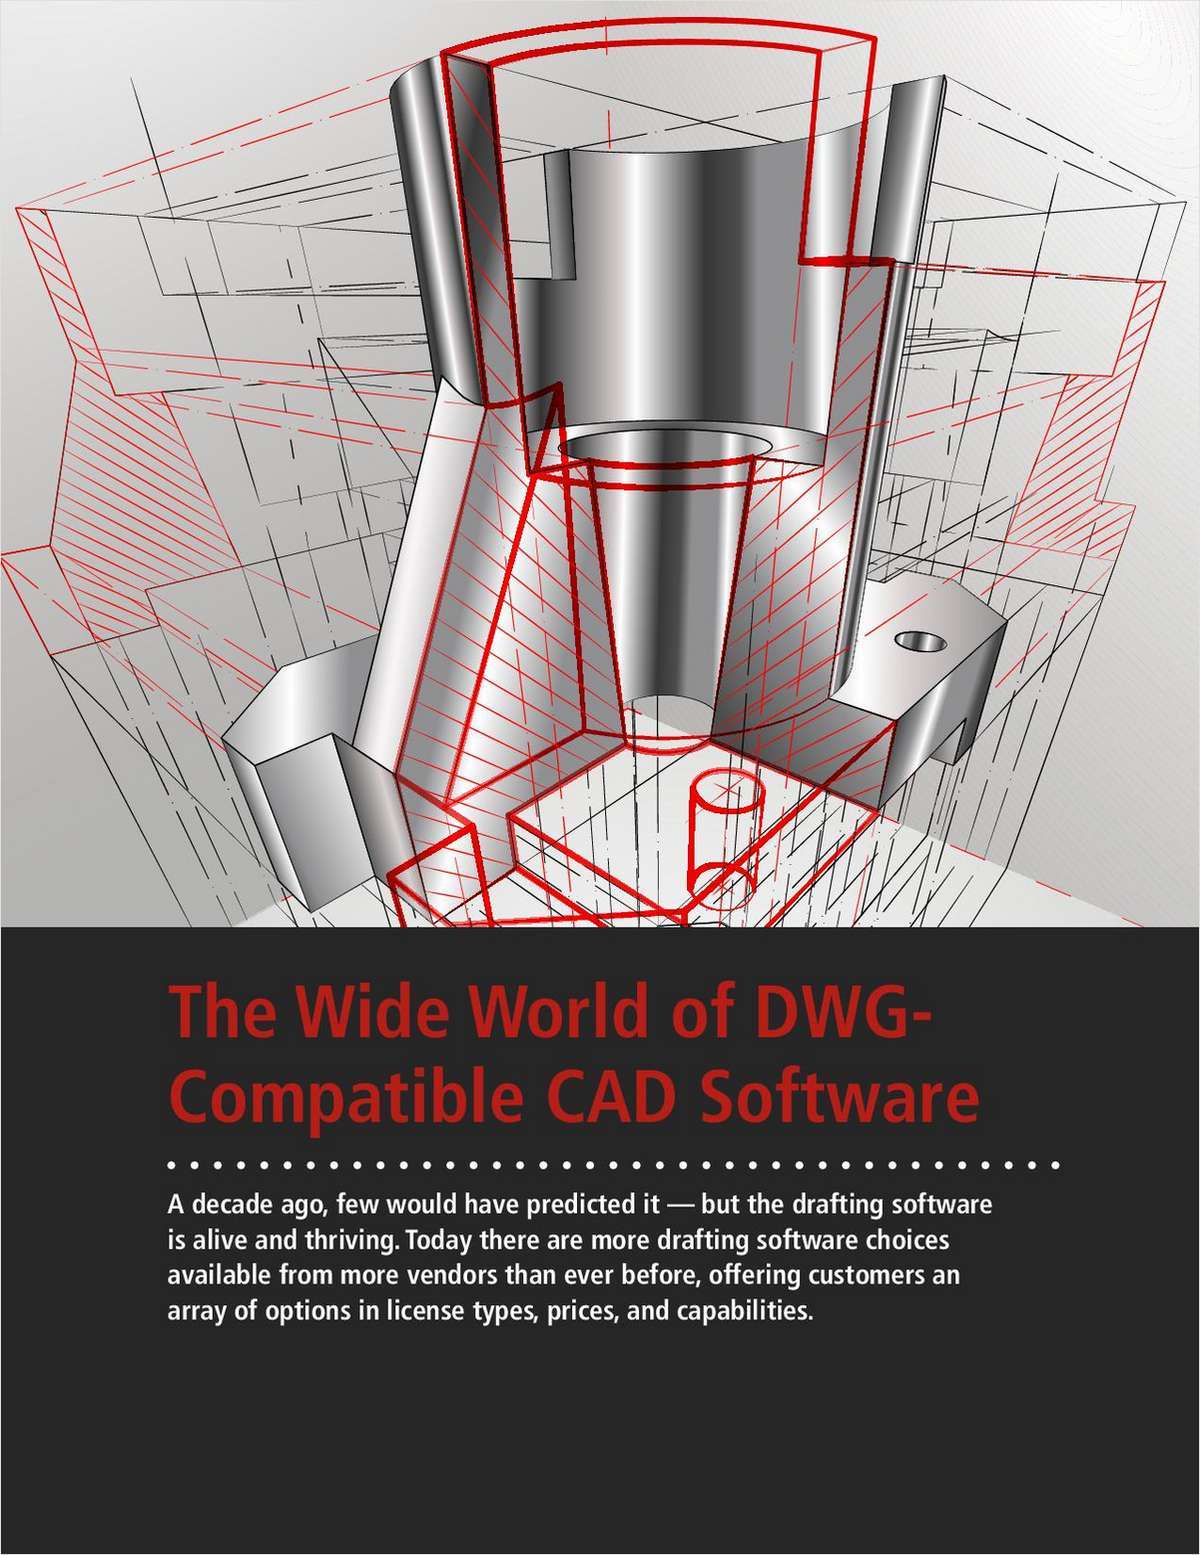 The Wide World of DWG Compatible Software